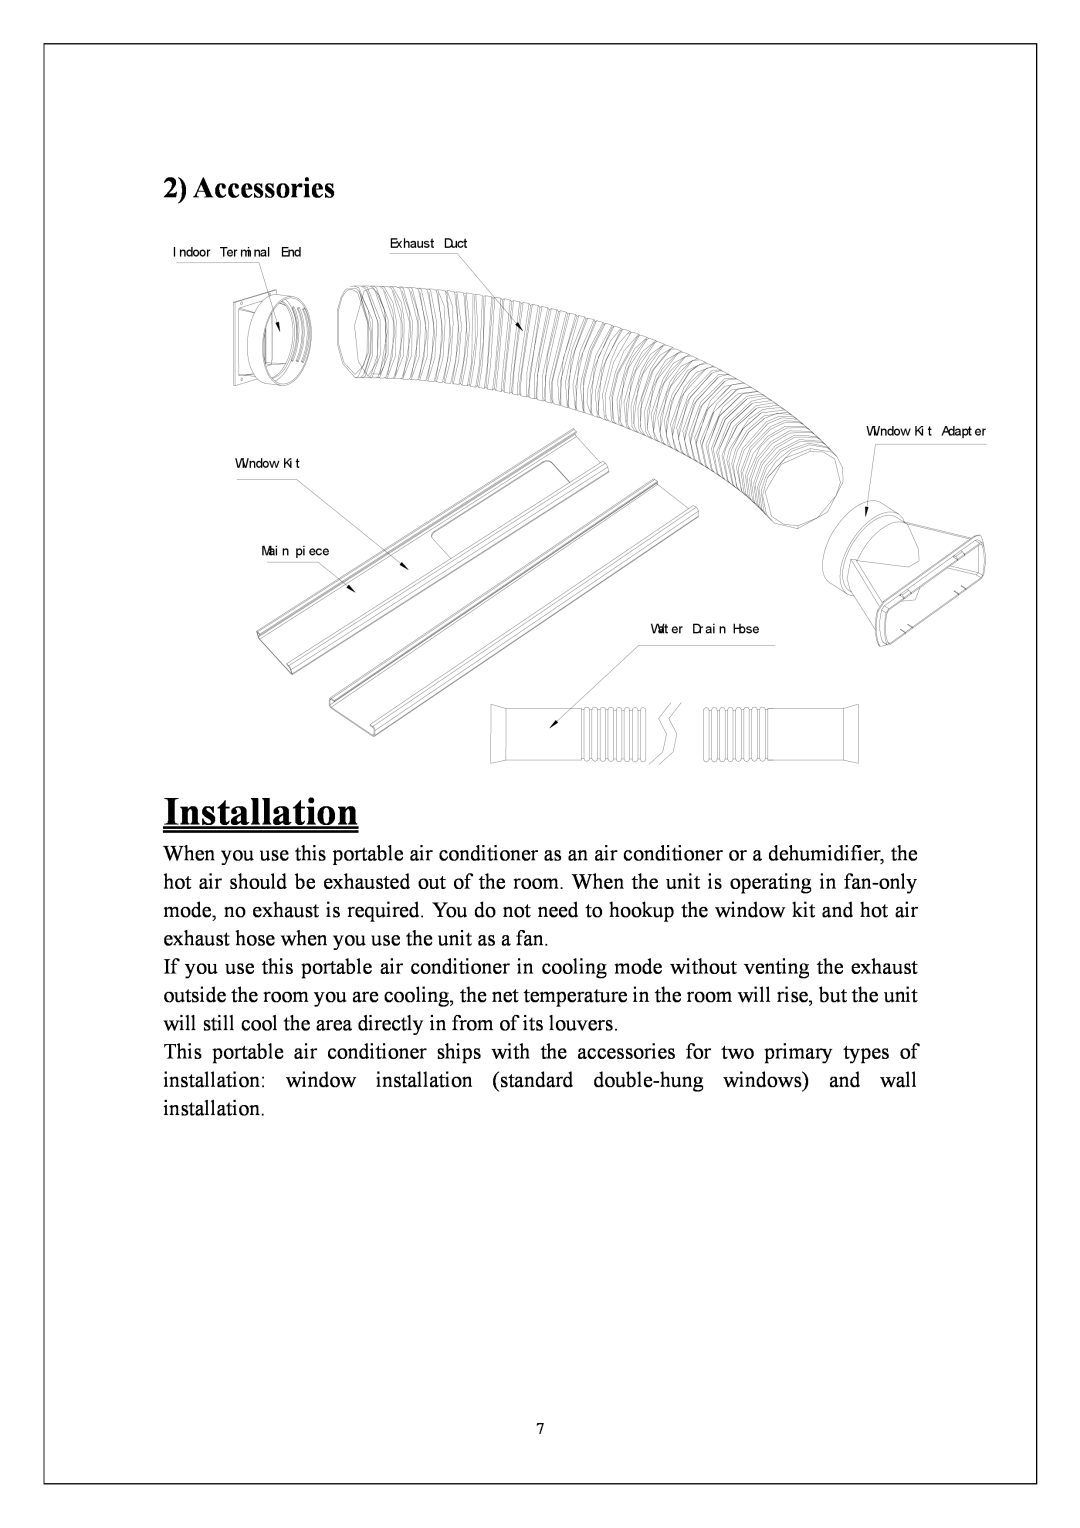 KoldFront PAC9000 manual Installation, Accessories 